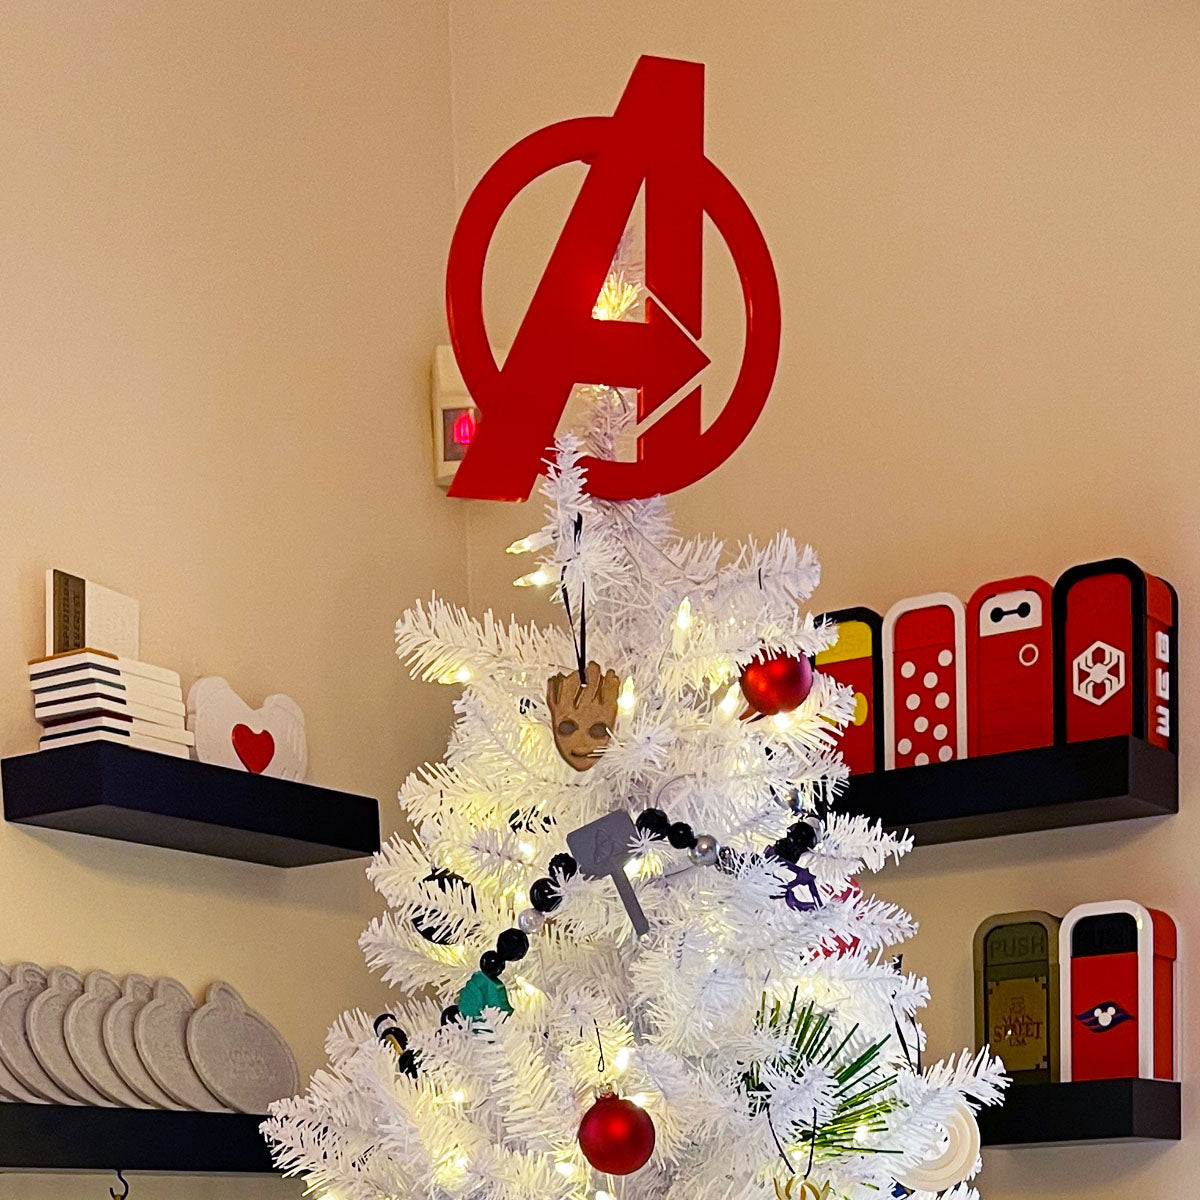 Avenged "A" Christmas Tree Topper - OOPSIE